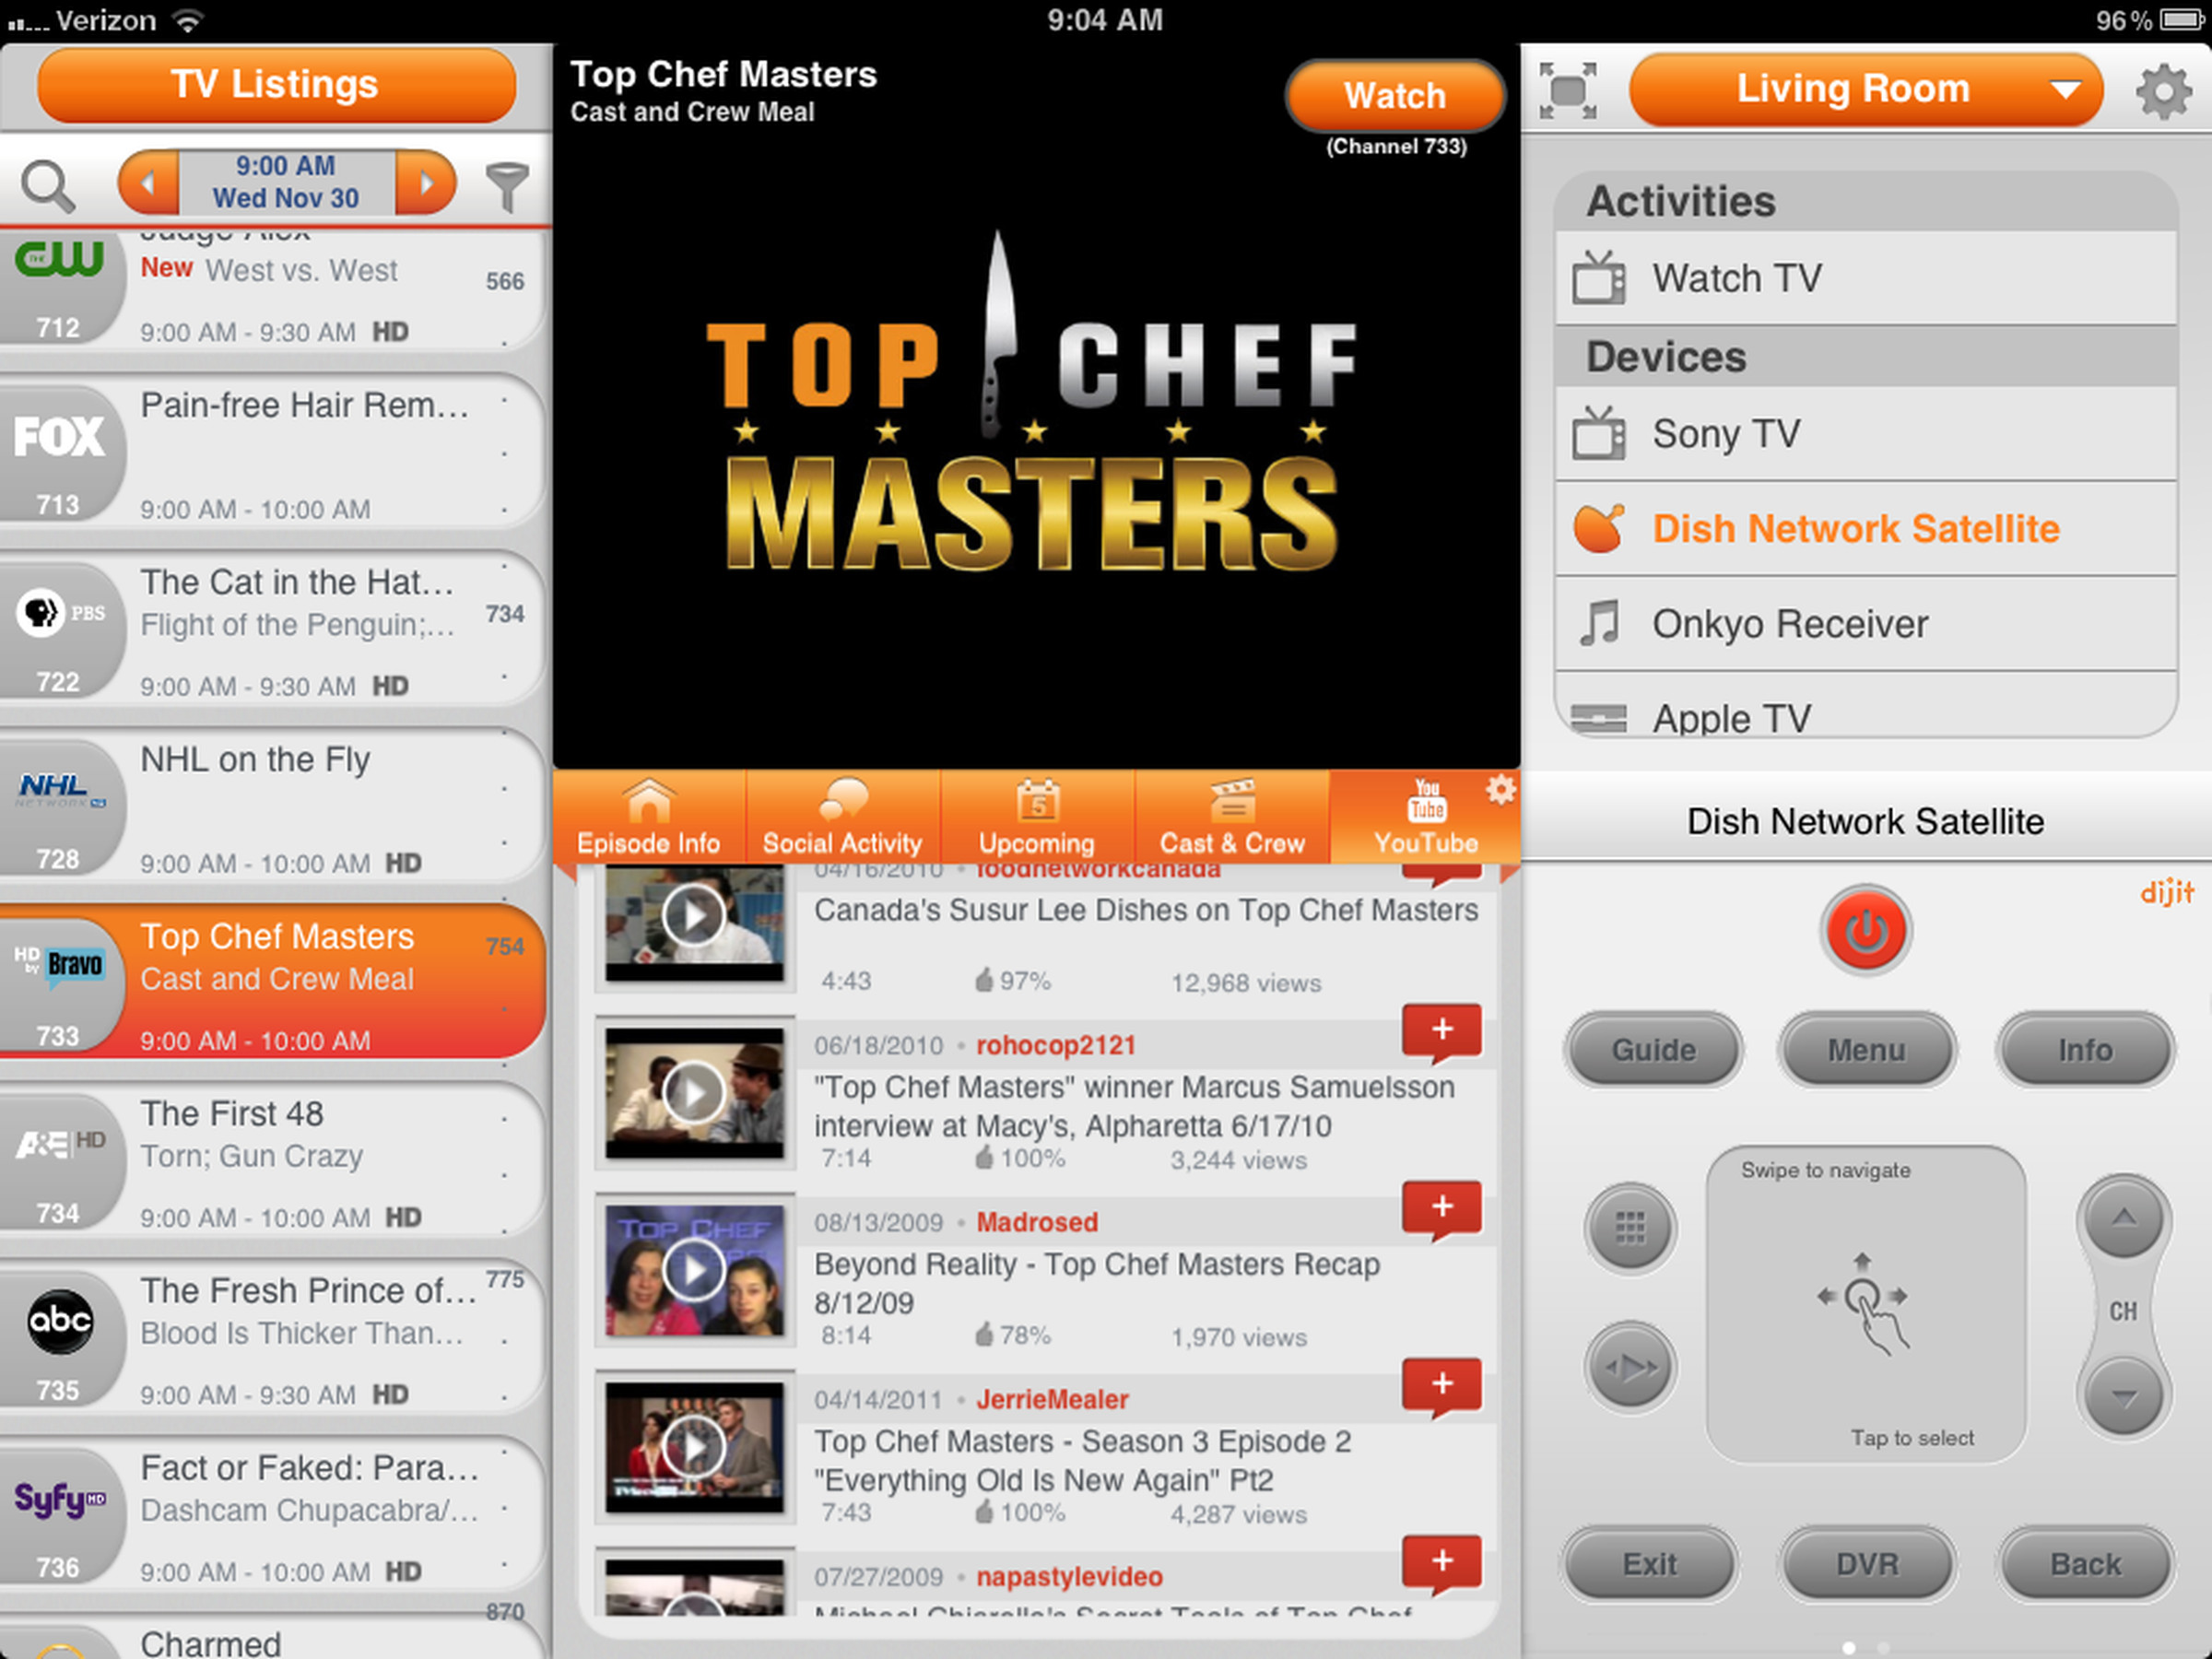 Dijit universal remote and TV guide app for iPad